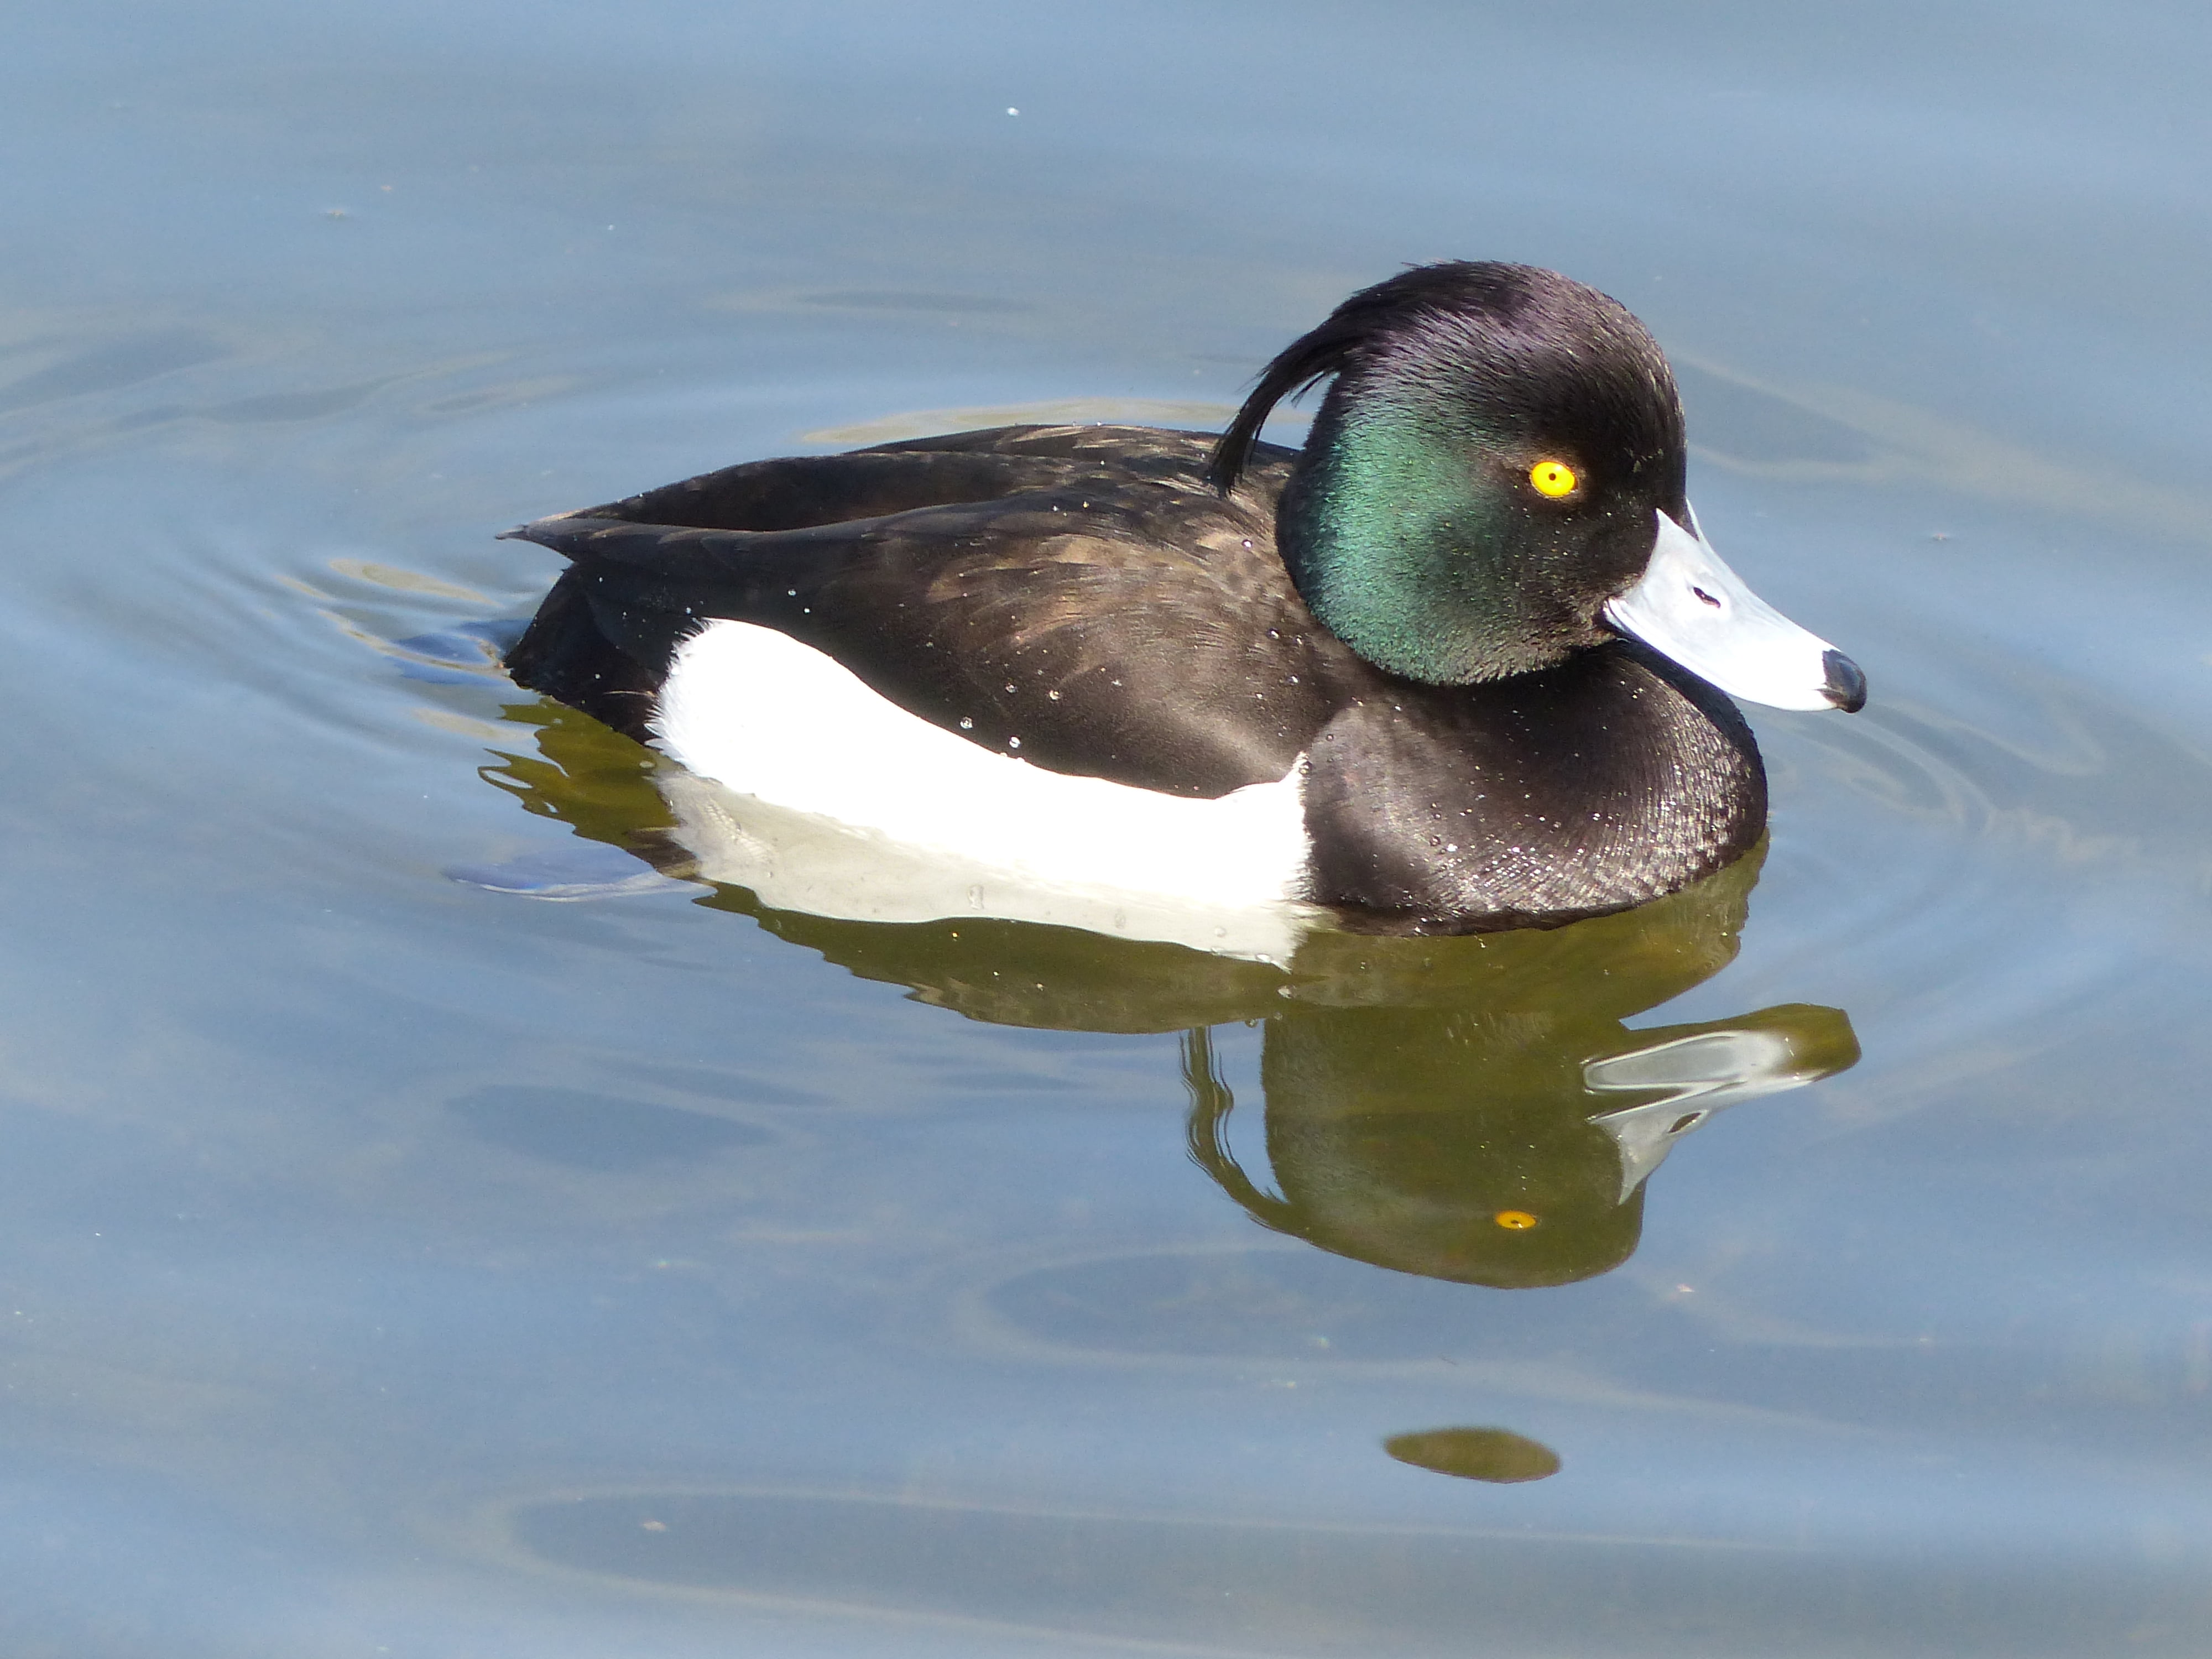 black and white duck on water during daytime, tufted duck, tufted duck